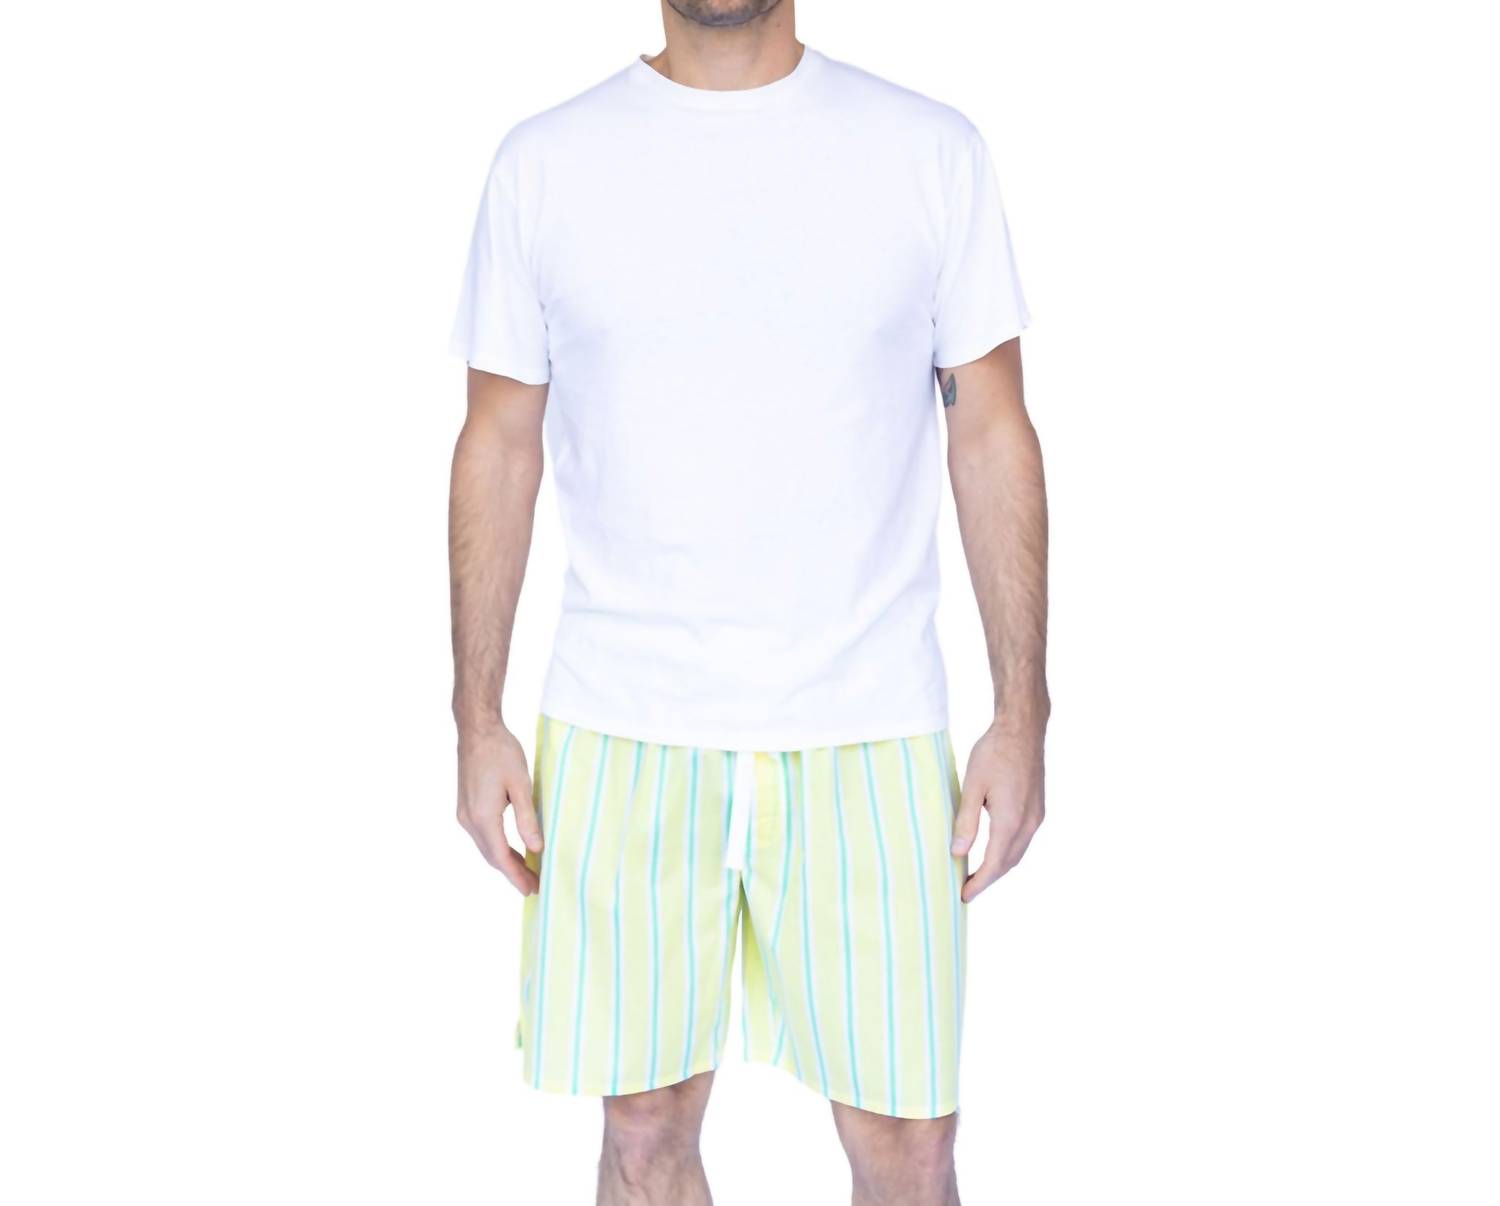 Sant And Abel - MEN'S ANDY COHEN SLEEP SHORTS